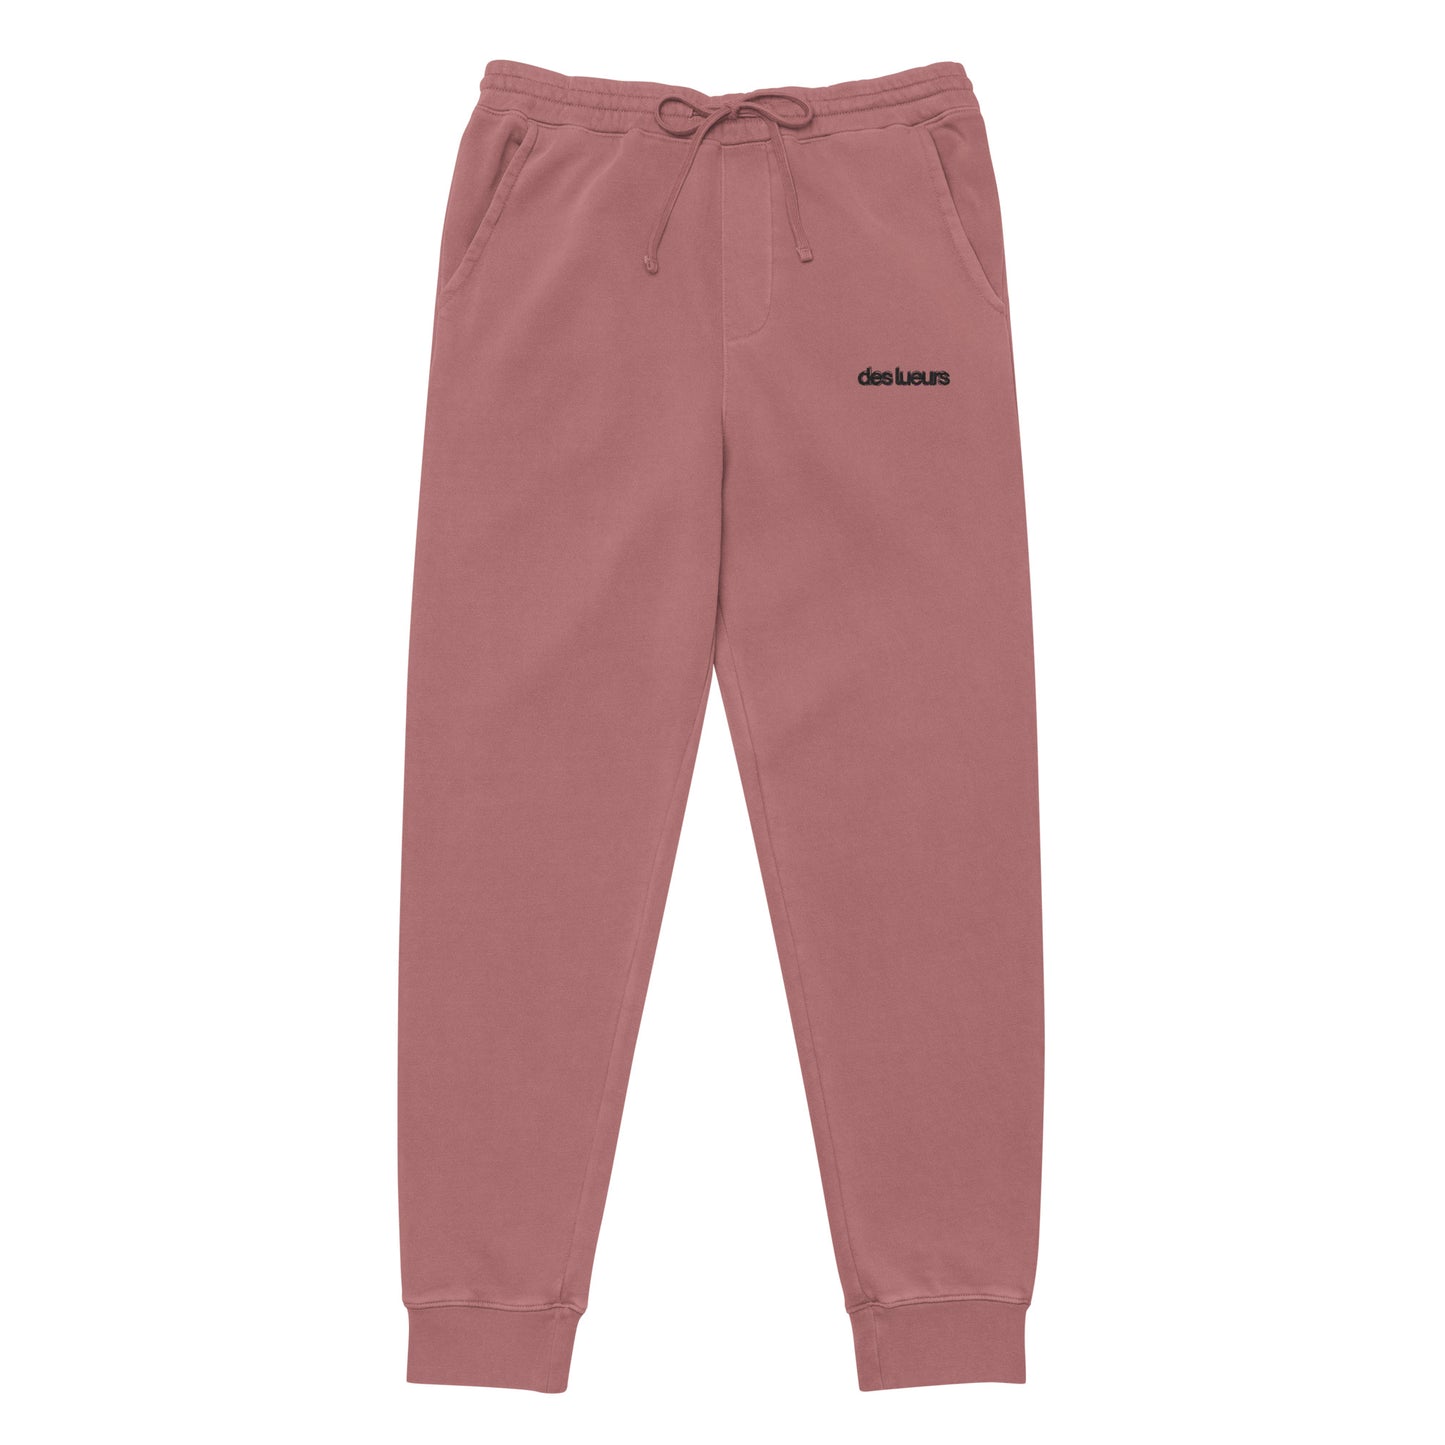 "the" embroidered sweats